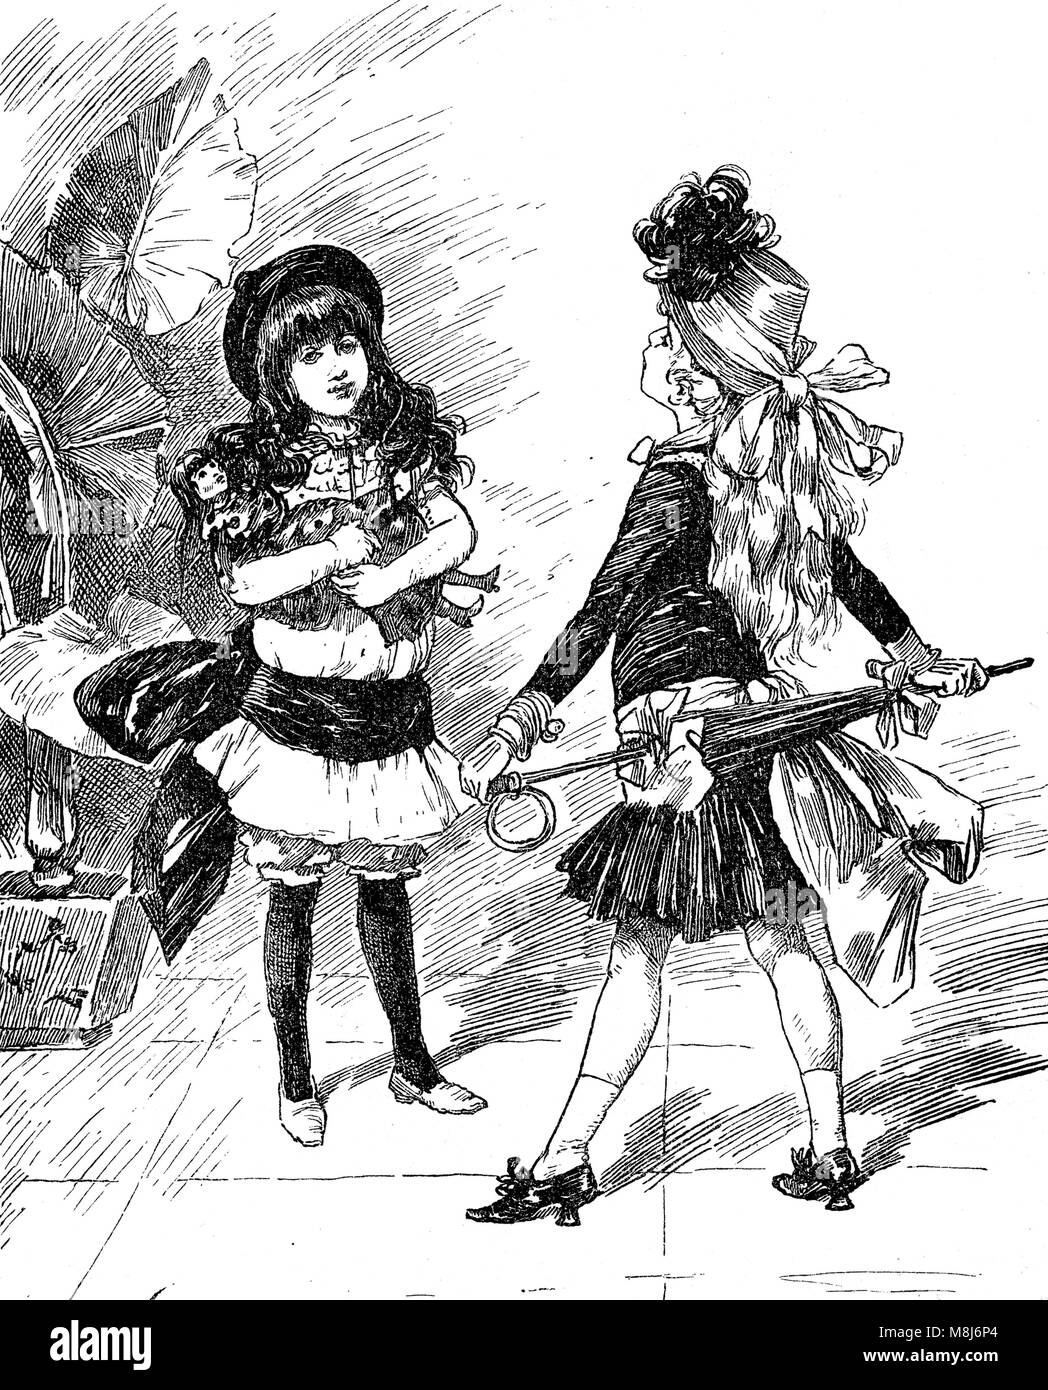 Vintage caricatures and fun: fashionable young girls confronting each other with fancy outfits Stock Photo